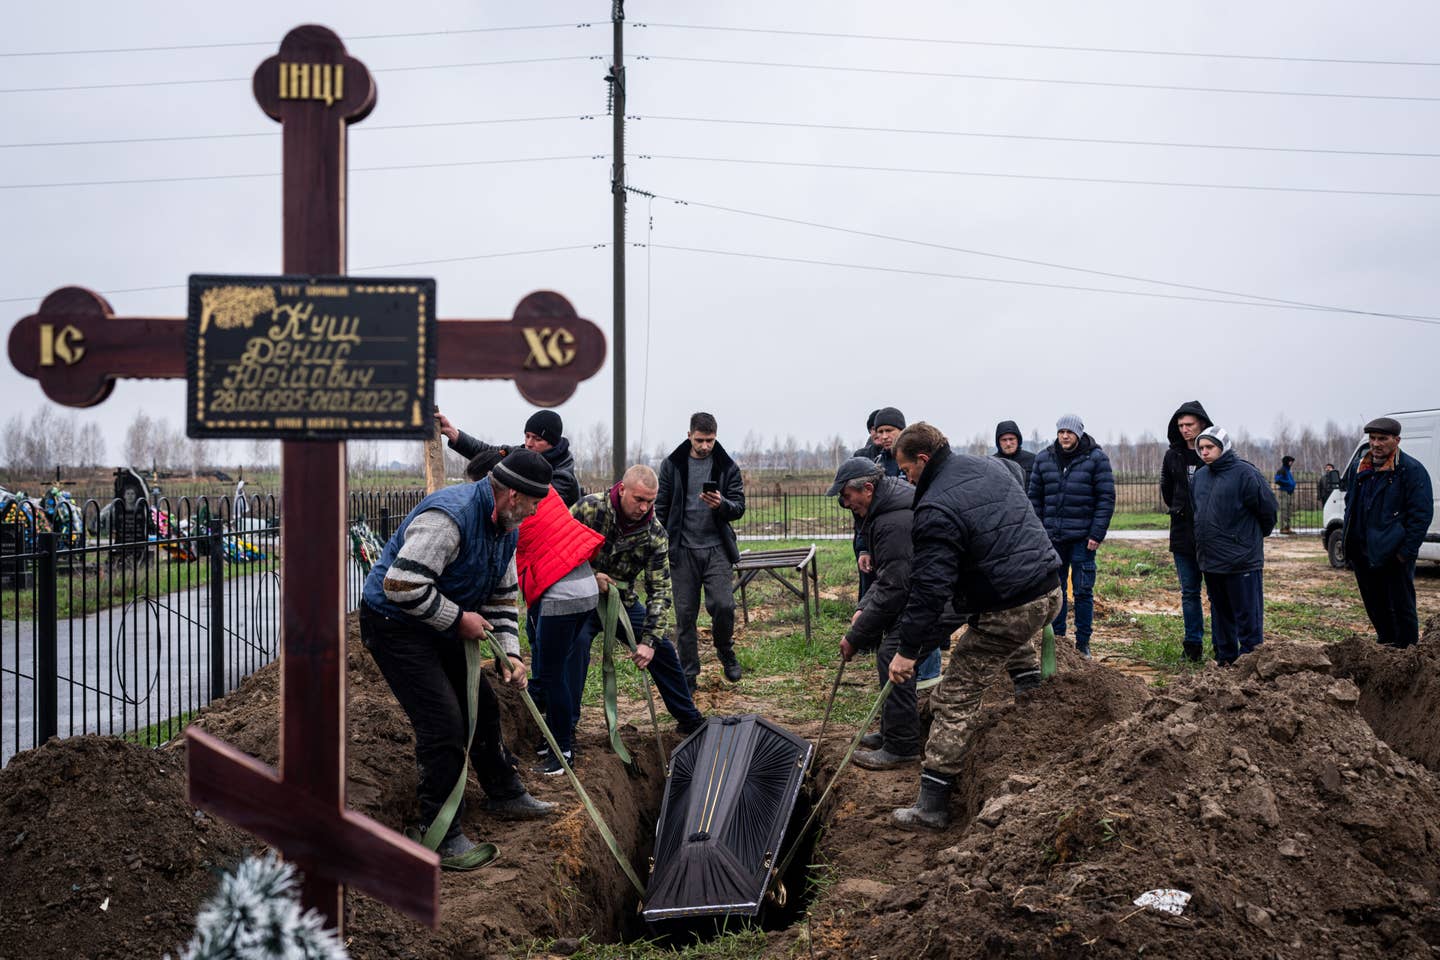 Cemetery workers dig graves and bury civilians who were killed during the Russian attacks in Bucha, Ukraine on April 22, 2022. <em>Photo by Wolfgang Schwan/Anadolu Agency via Getty Images</em>